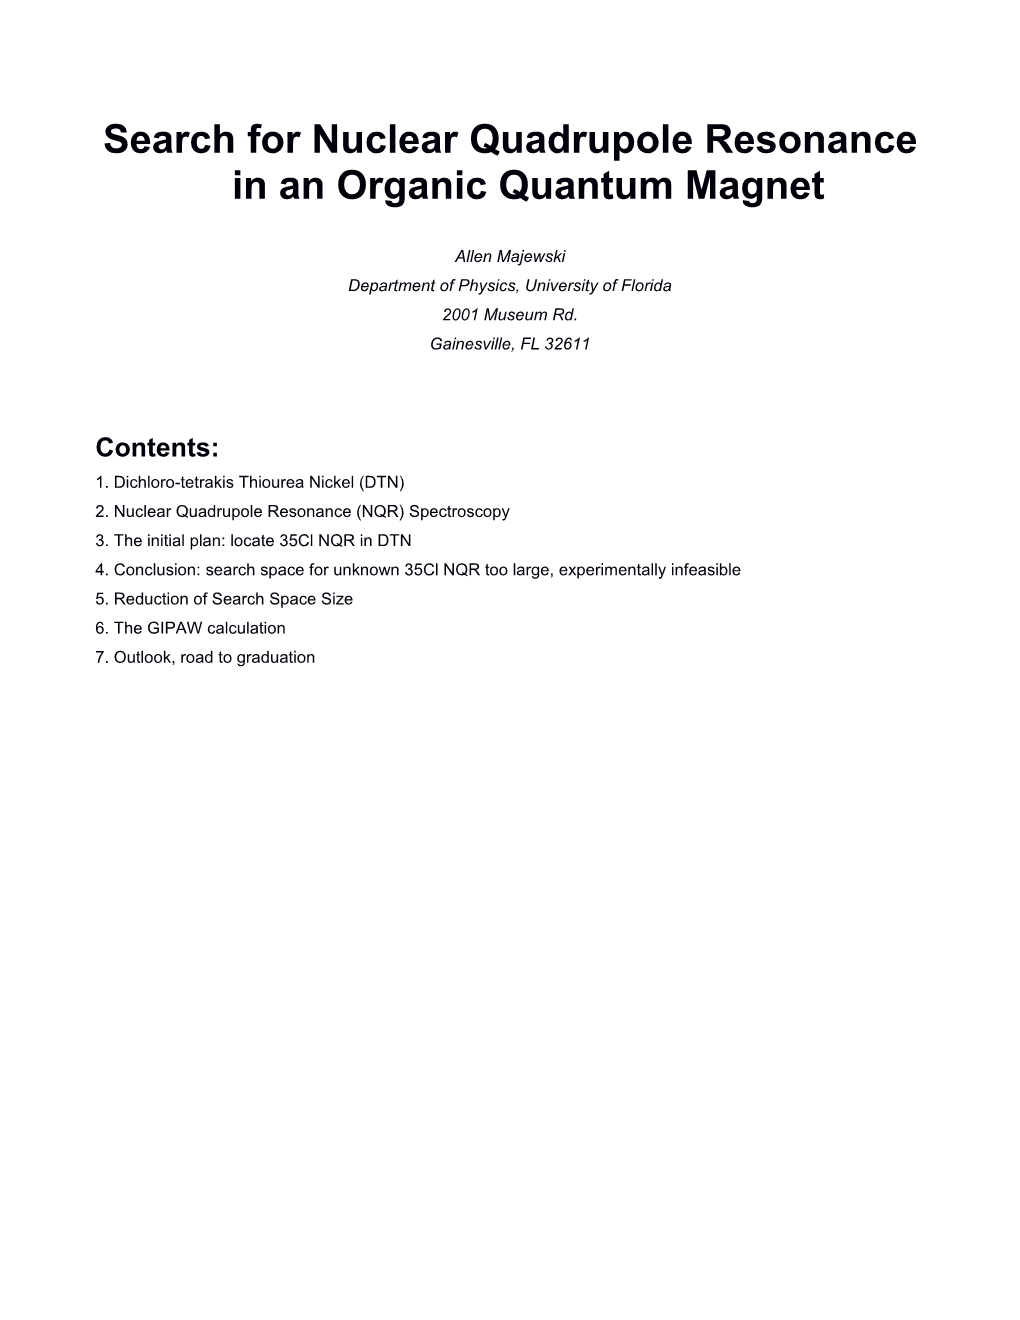 Search for Nuclear Quadrupole Resonance in an Organic Quantum Magnet